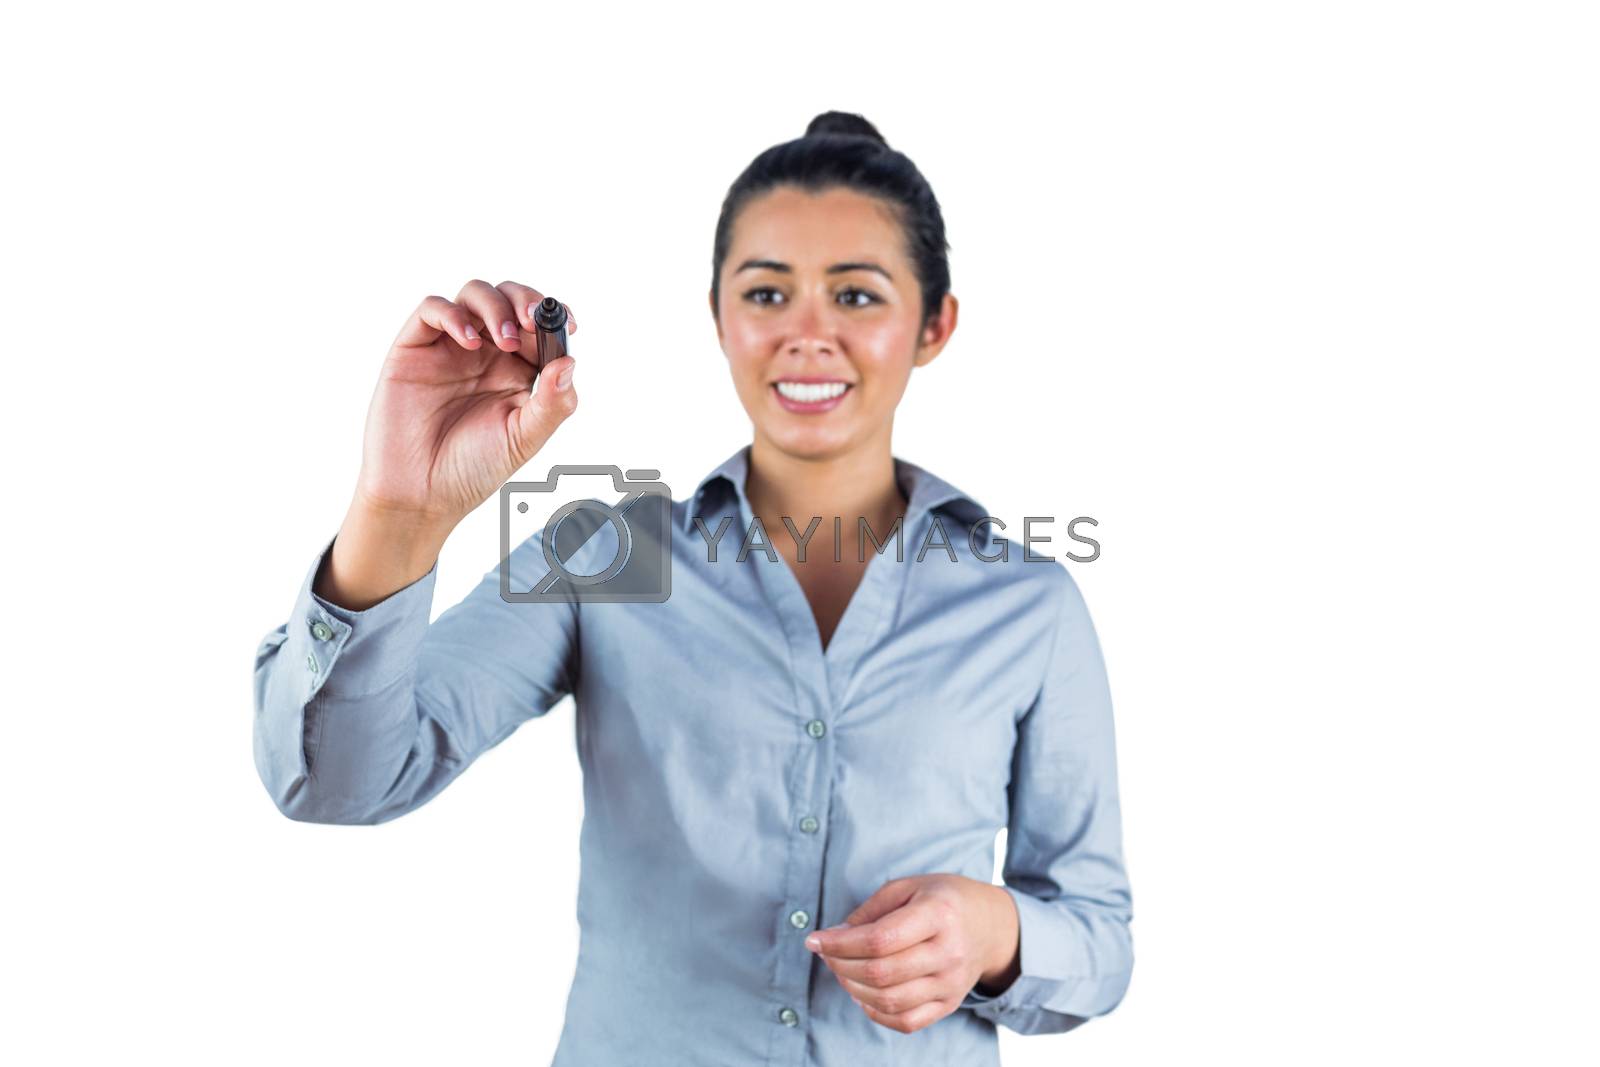 Royalty free image of Woman about to draw with a marker by Wavebreakmedia